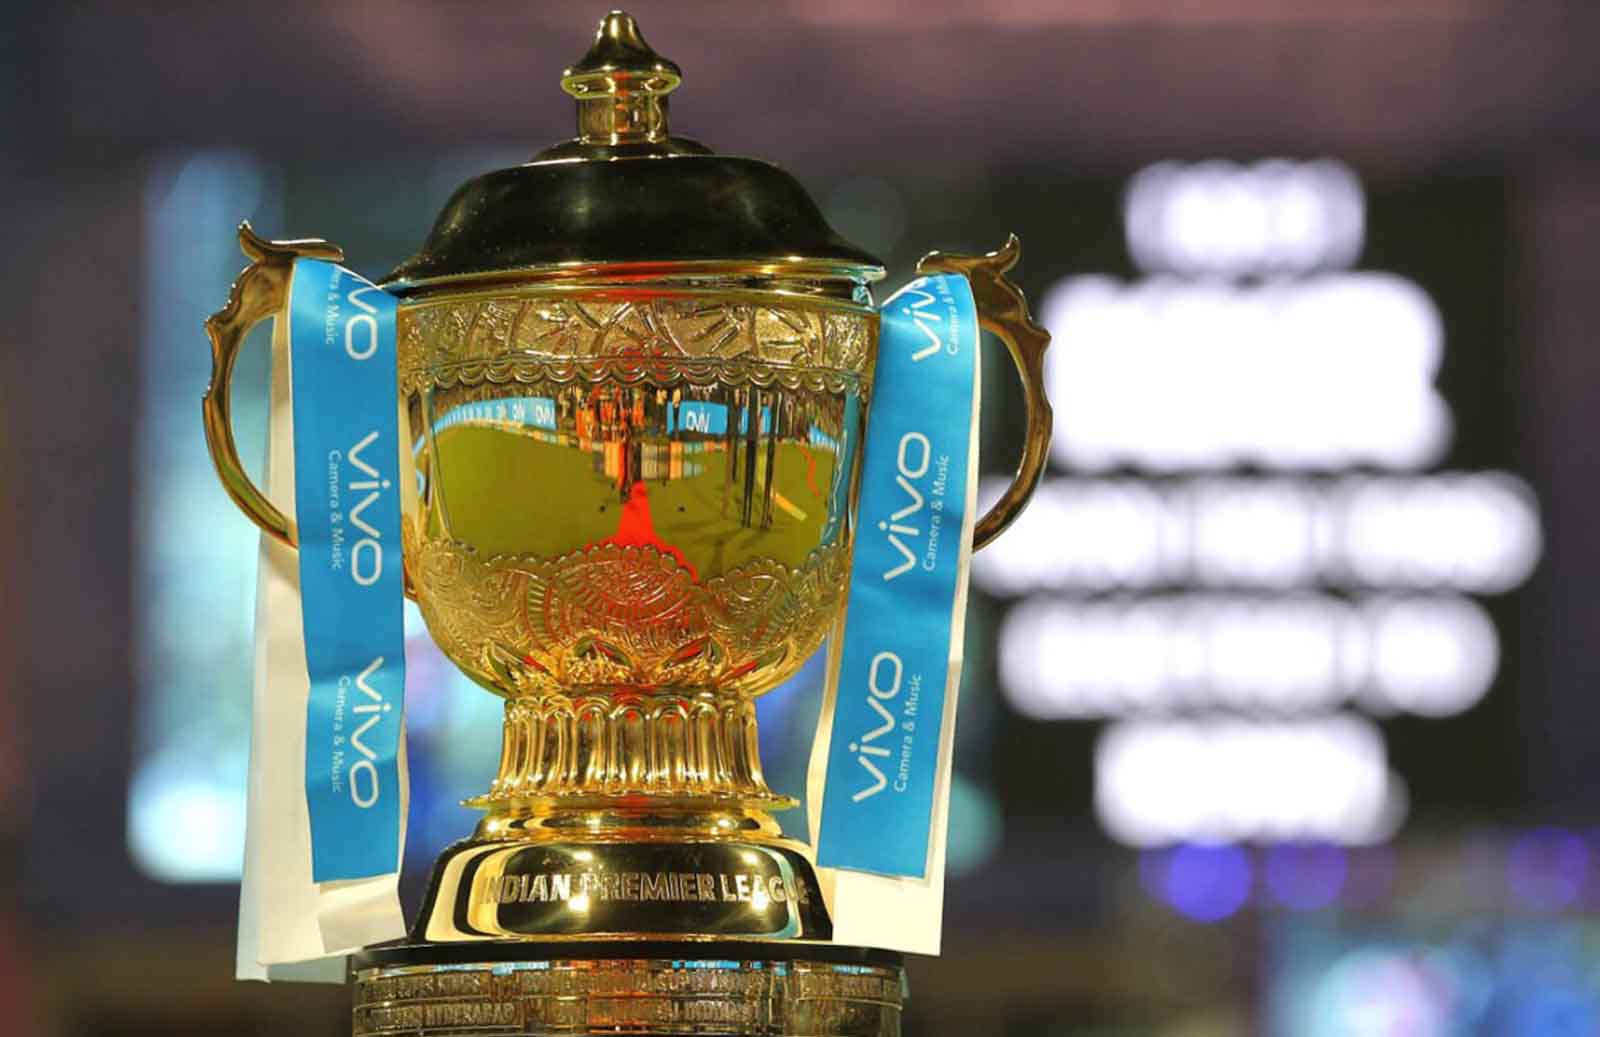 BCCI to meet primary stakeholders to Discuss Final Plans for IPL 2020